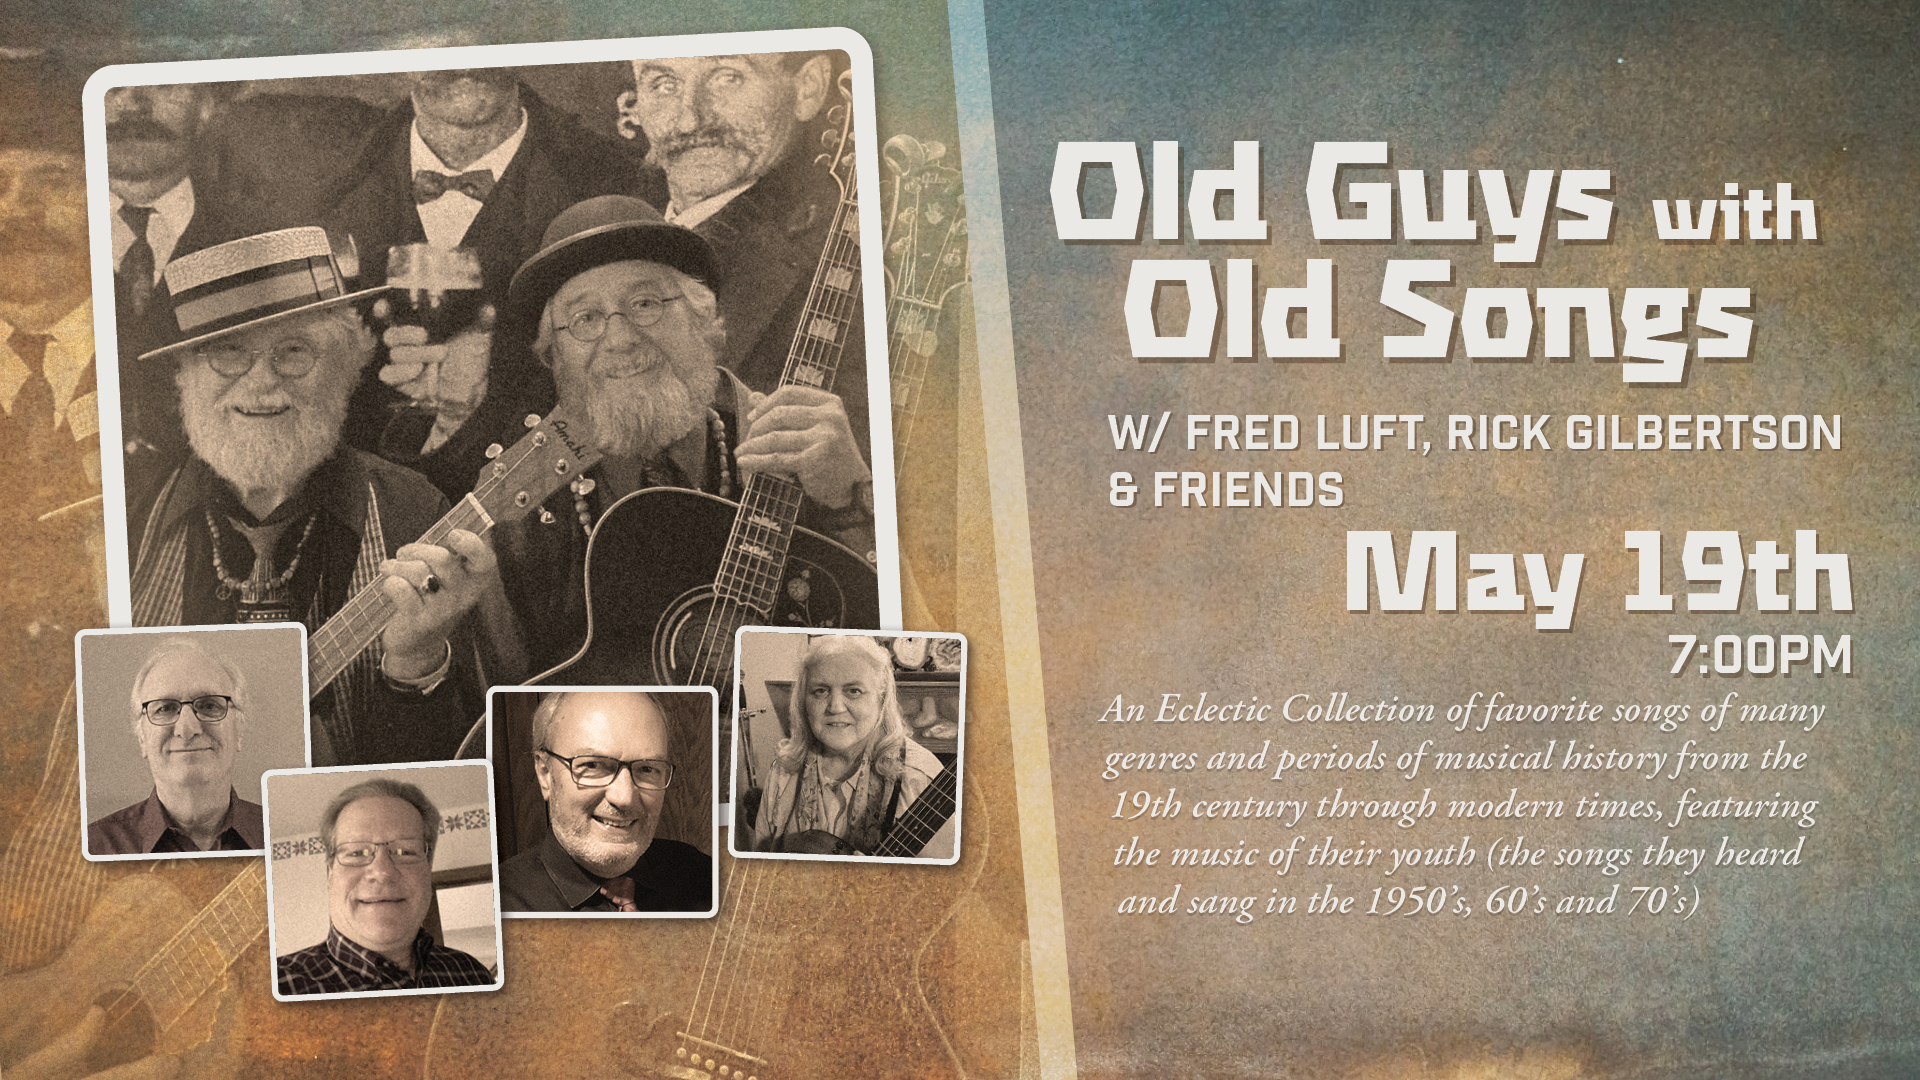 Old Guys with Old Songs w/ Fred Luft, Rick Gilbertson & Friends